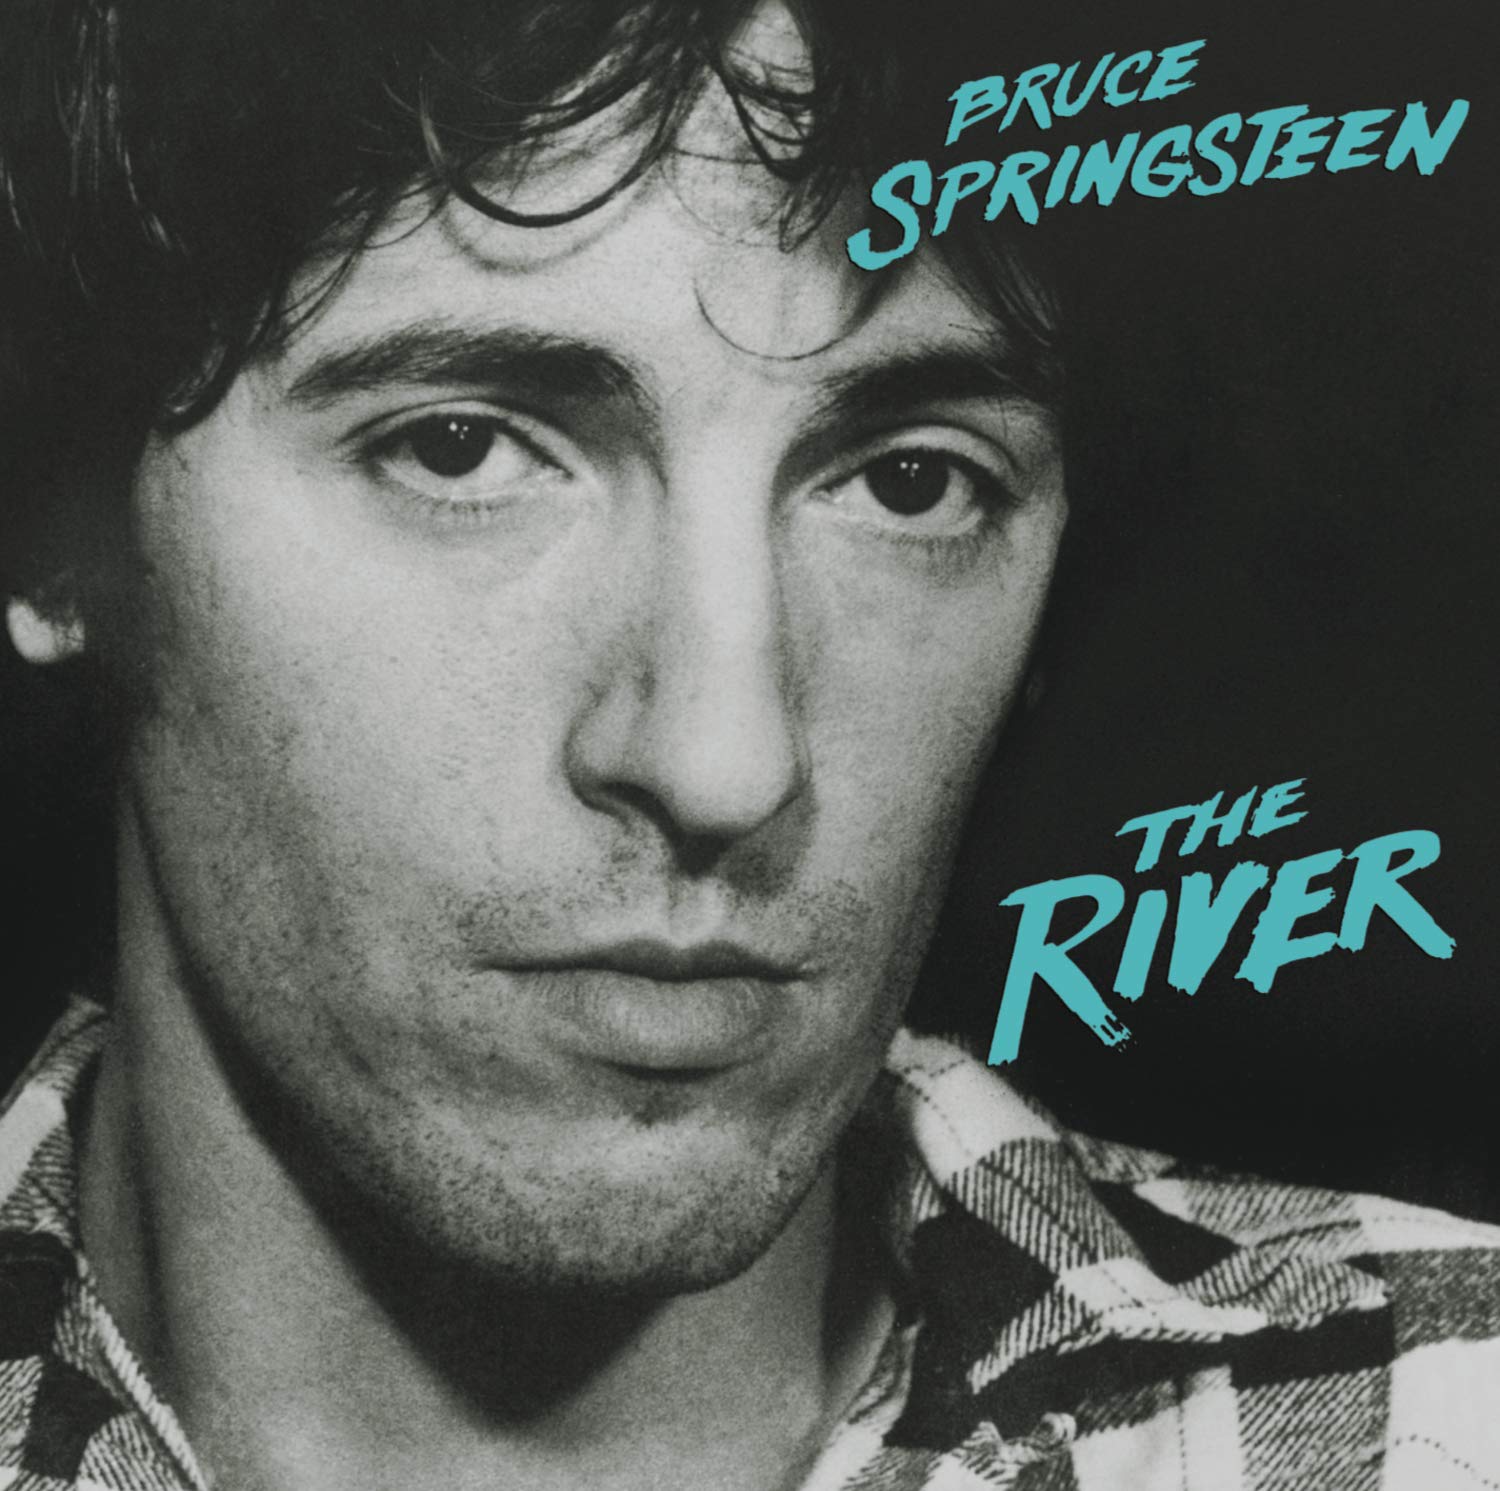 Bruce Springsteen "The River" 2LP